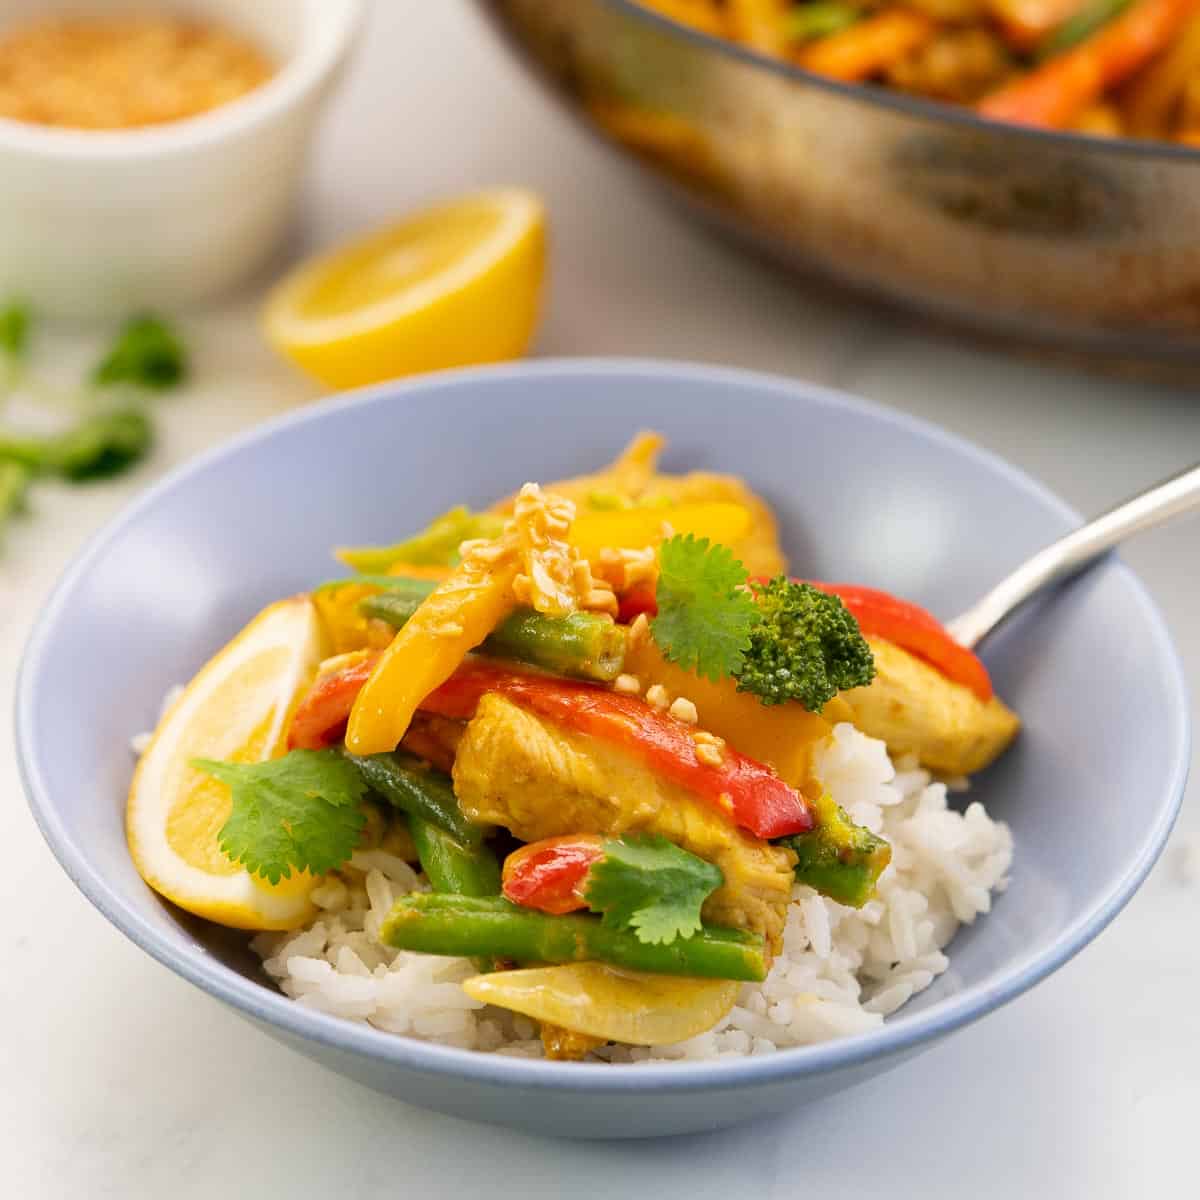 A blue bowl of chicken and vegetables with a peanut satay sauce on rice.